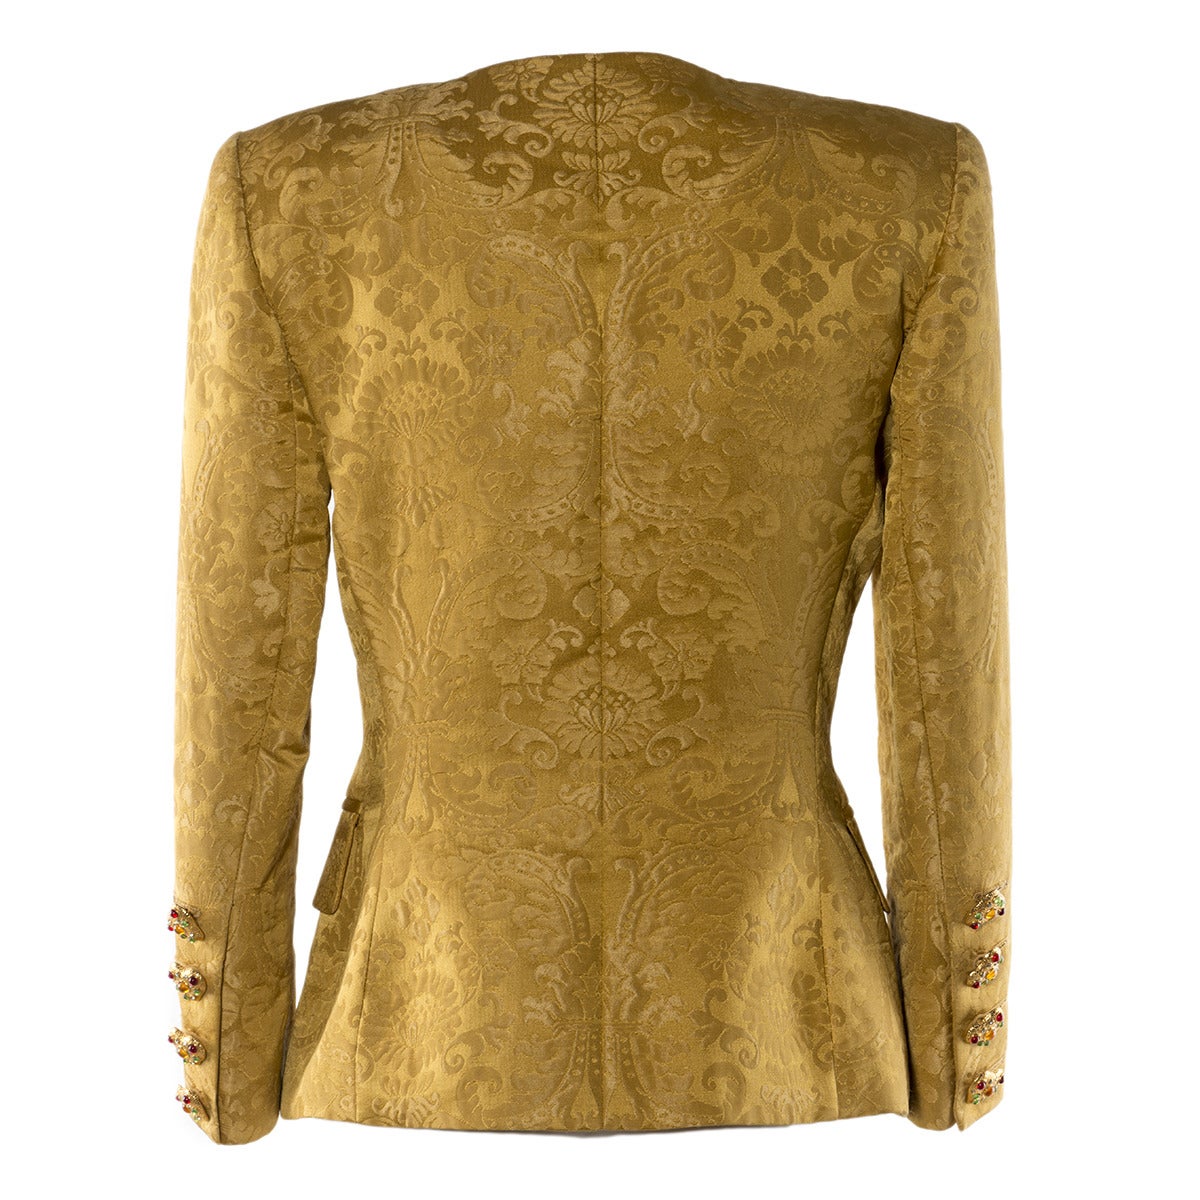 Fantastic jacket by Rena Lange
Yellow/gold damask textile (silk and polyester)
Amazing jewel buttons, heart shape
2 Pockets
Size itaian 40 (US 4/6)
Made in Germany
Worldwide express shipping included in the price !